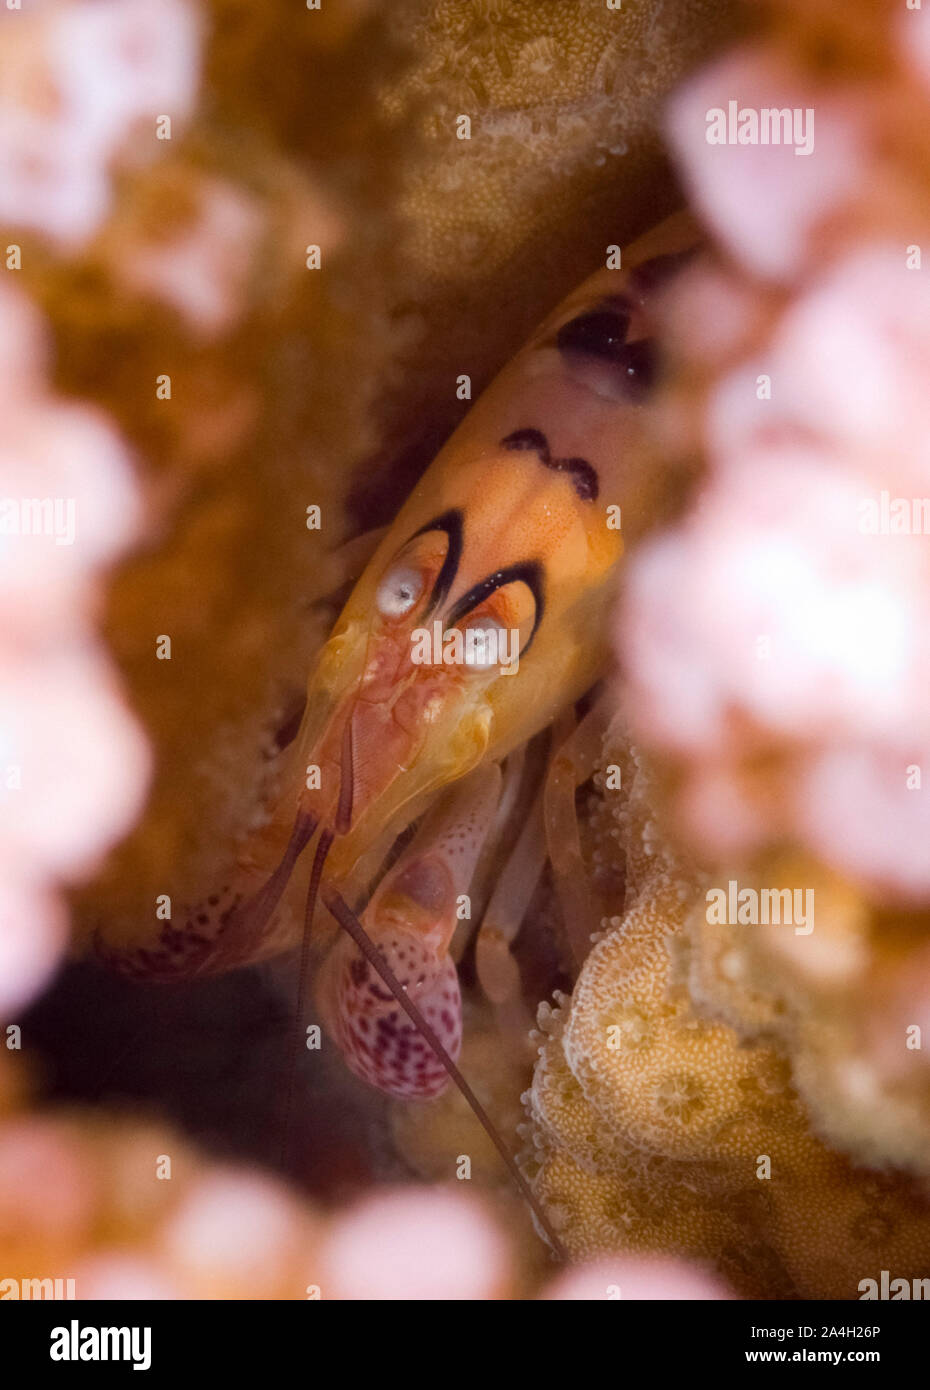 Cauliflower Coral Snapping Shrimp, Alpheus lottini, in coral, West White Beach Cave dive site, Christmas Island, Australia, Indian Ocean Stock Photo